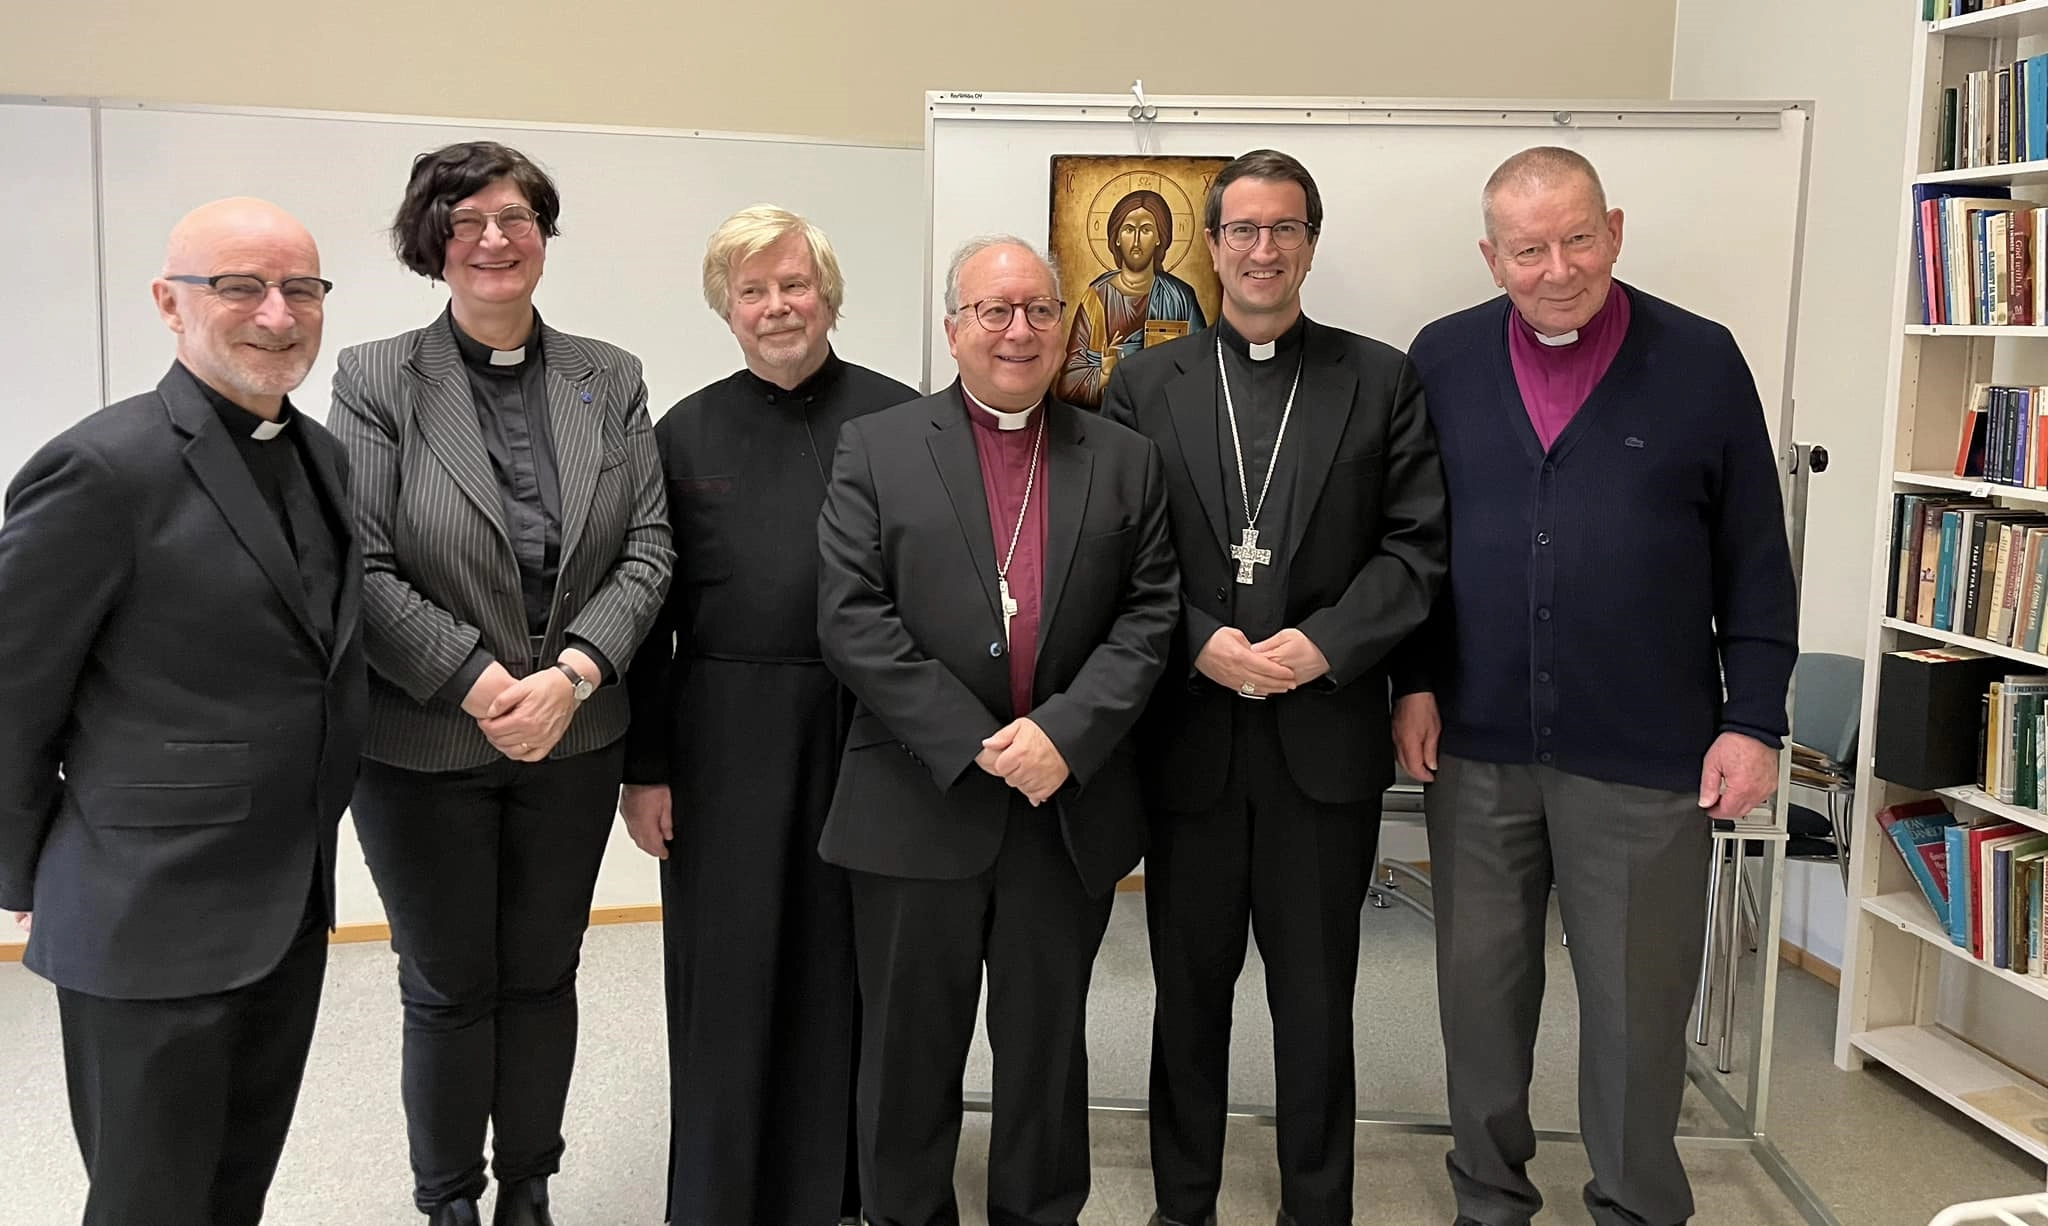 Some of the participants in the 10th meeting of the Malines Conversations Group held in Helsinki. From left to right: Dr Jaakko Rusama, Ms Mayvor Wärn-Rancken (Gen Sec of the Finnish Ecumenical Council), Metropolitan Fr Ambrosius, Bishop David Hamid, Bishop Raimo Goyarrola of the Catholic Church in Finland and Emeritus Bishop Eero Huovinen of the Finnish Lutheran Church